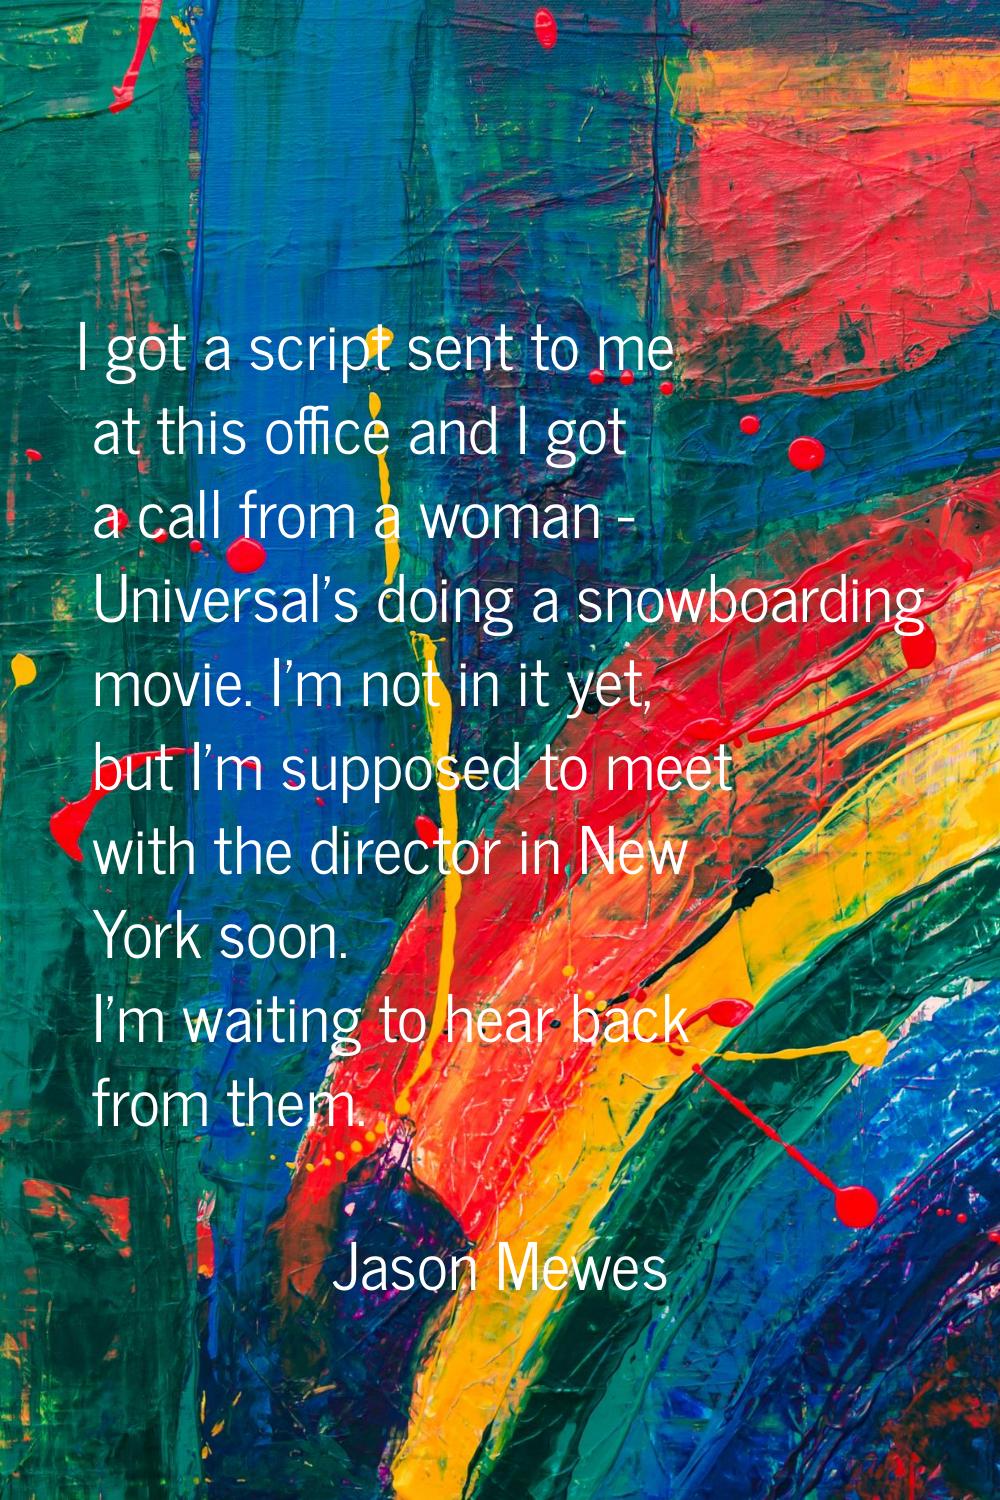 I got a script sent to me at this office and I got a call from a woman - Universal's doing a snowbo